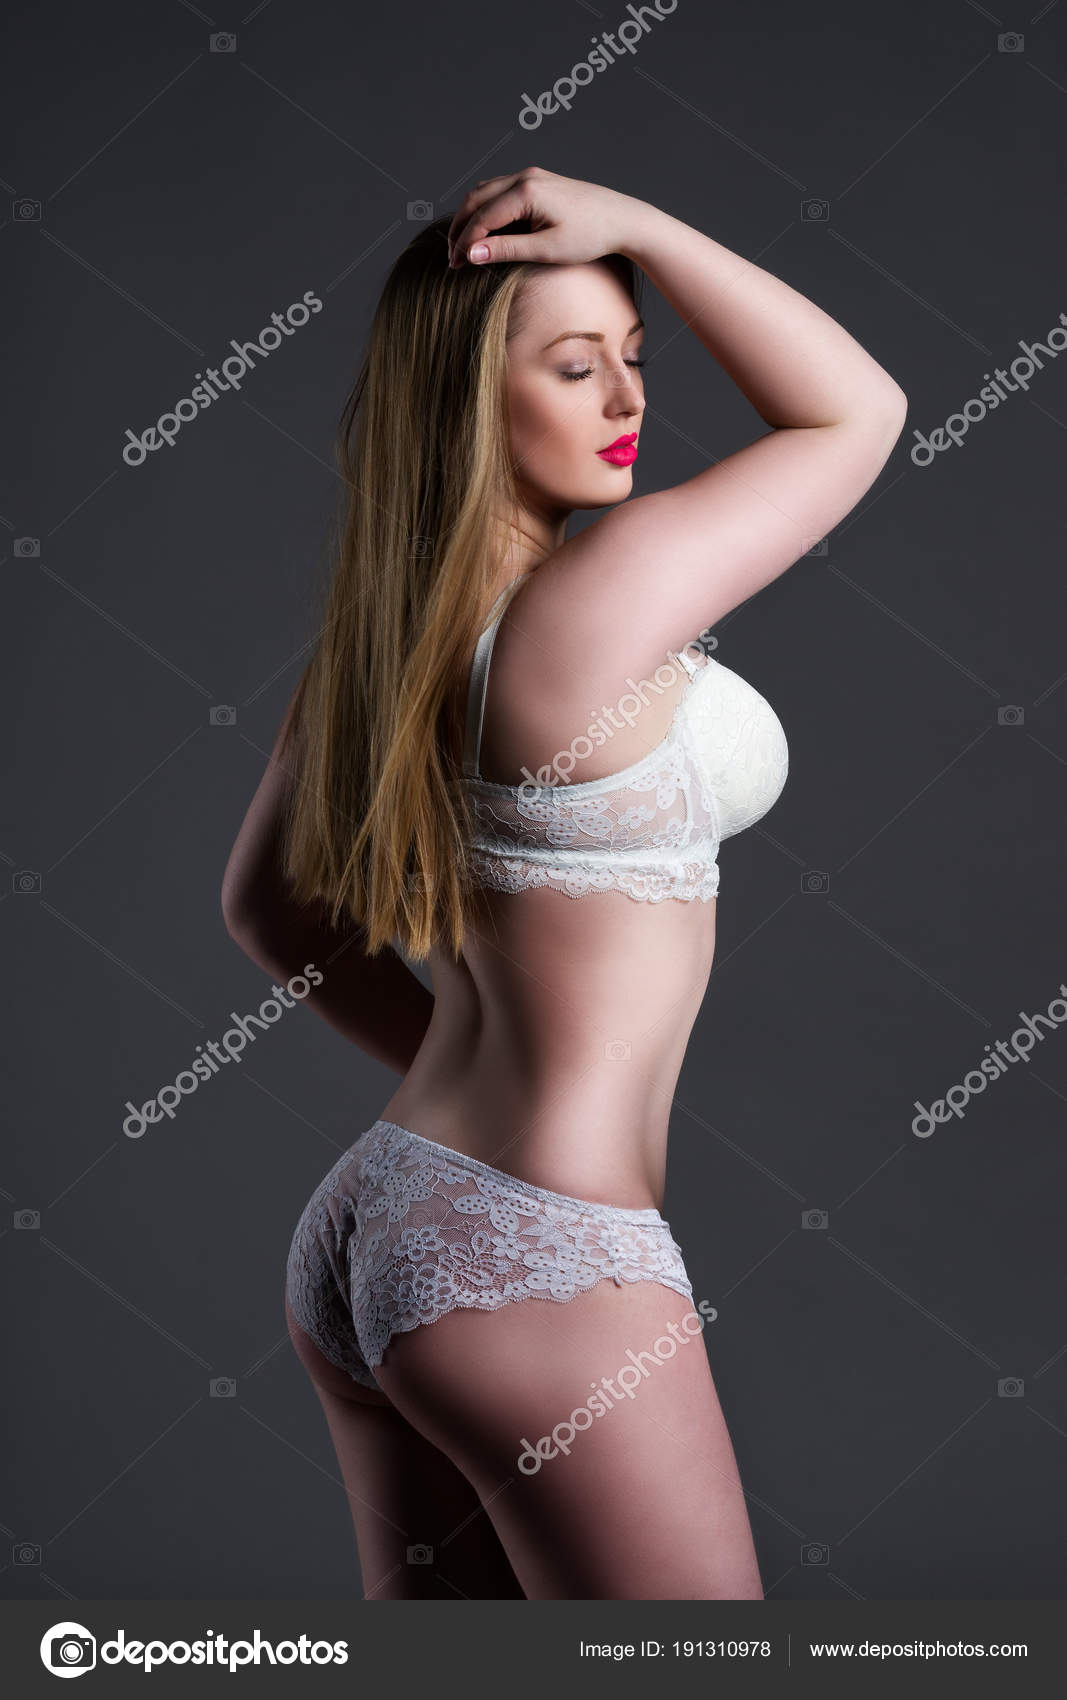 Blonde fat girl in lingerie Plus Size Sexy Model In White Underwear Fat Woman With Big Natural Breast On Gray Studio Background Overweight Female Body Stock Photo By C Starast 191310978